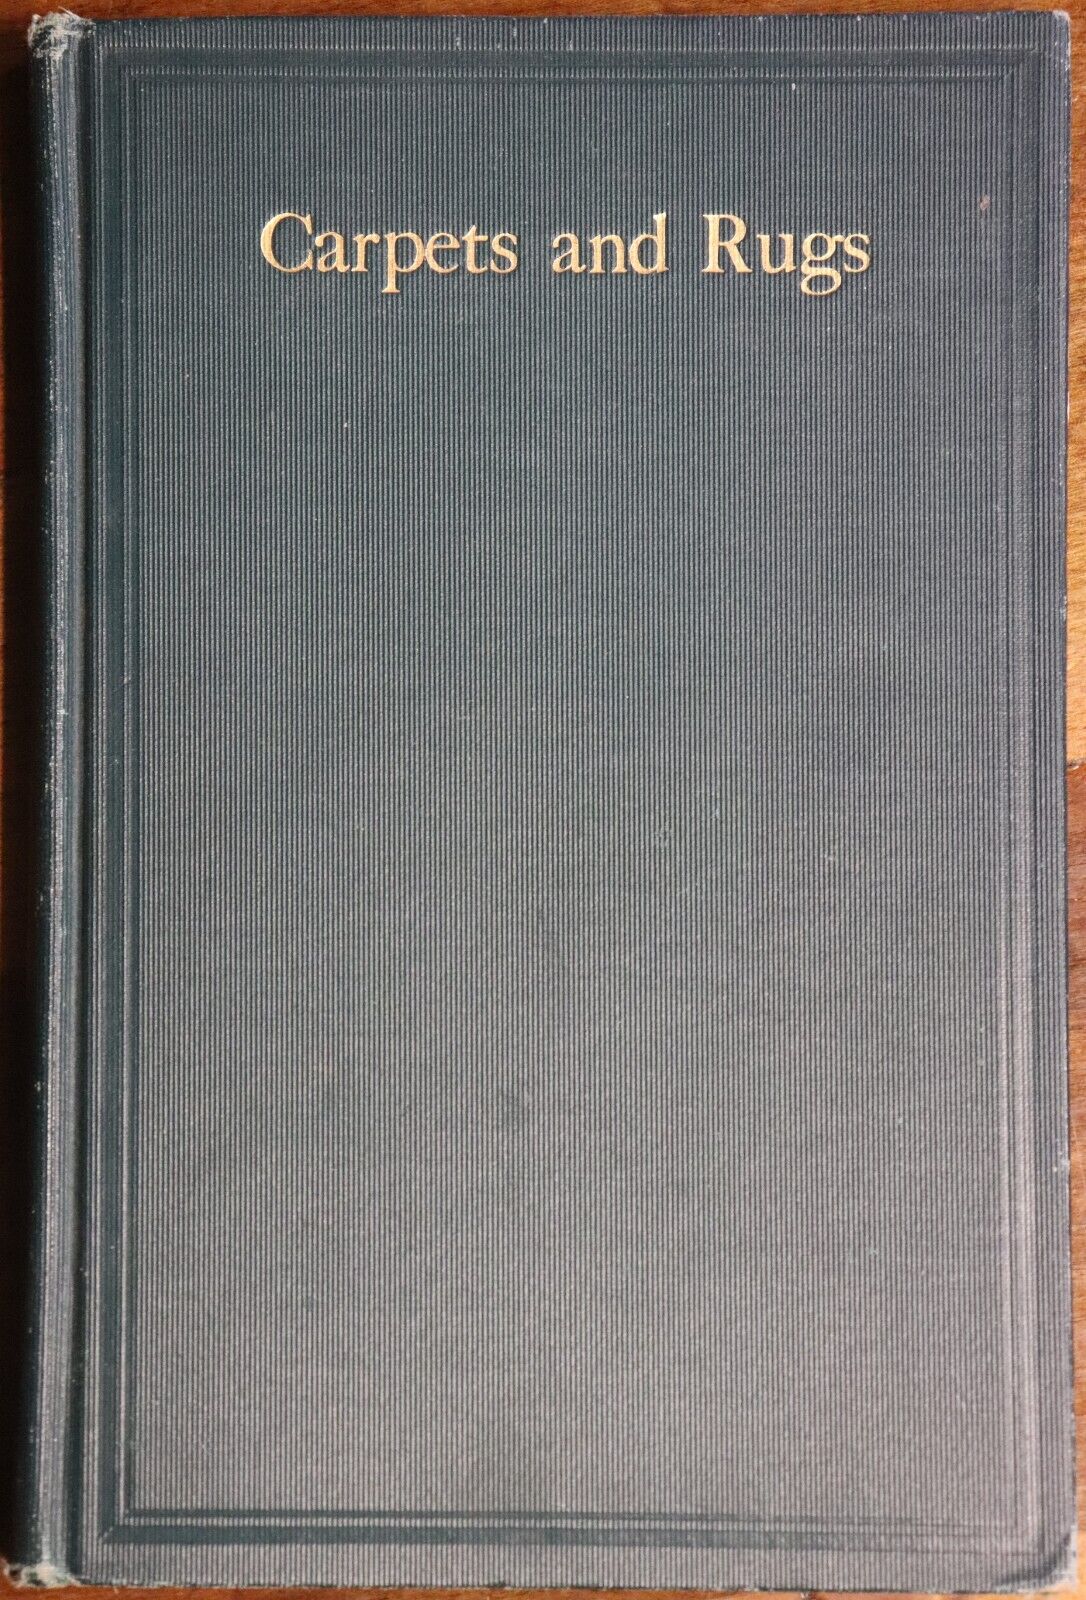 Carpets & Rugs by OA Kenyon - 1923 - First Edition History Book